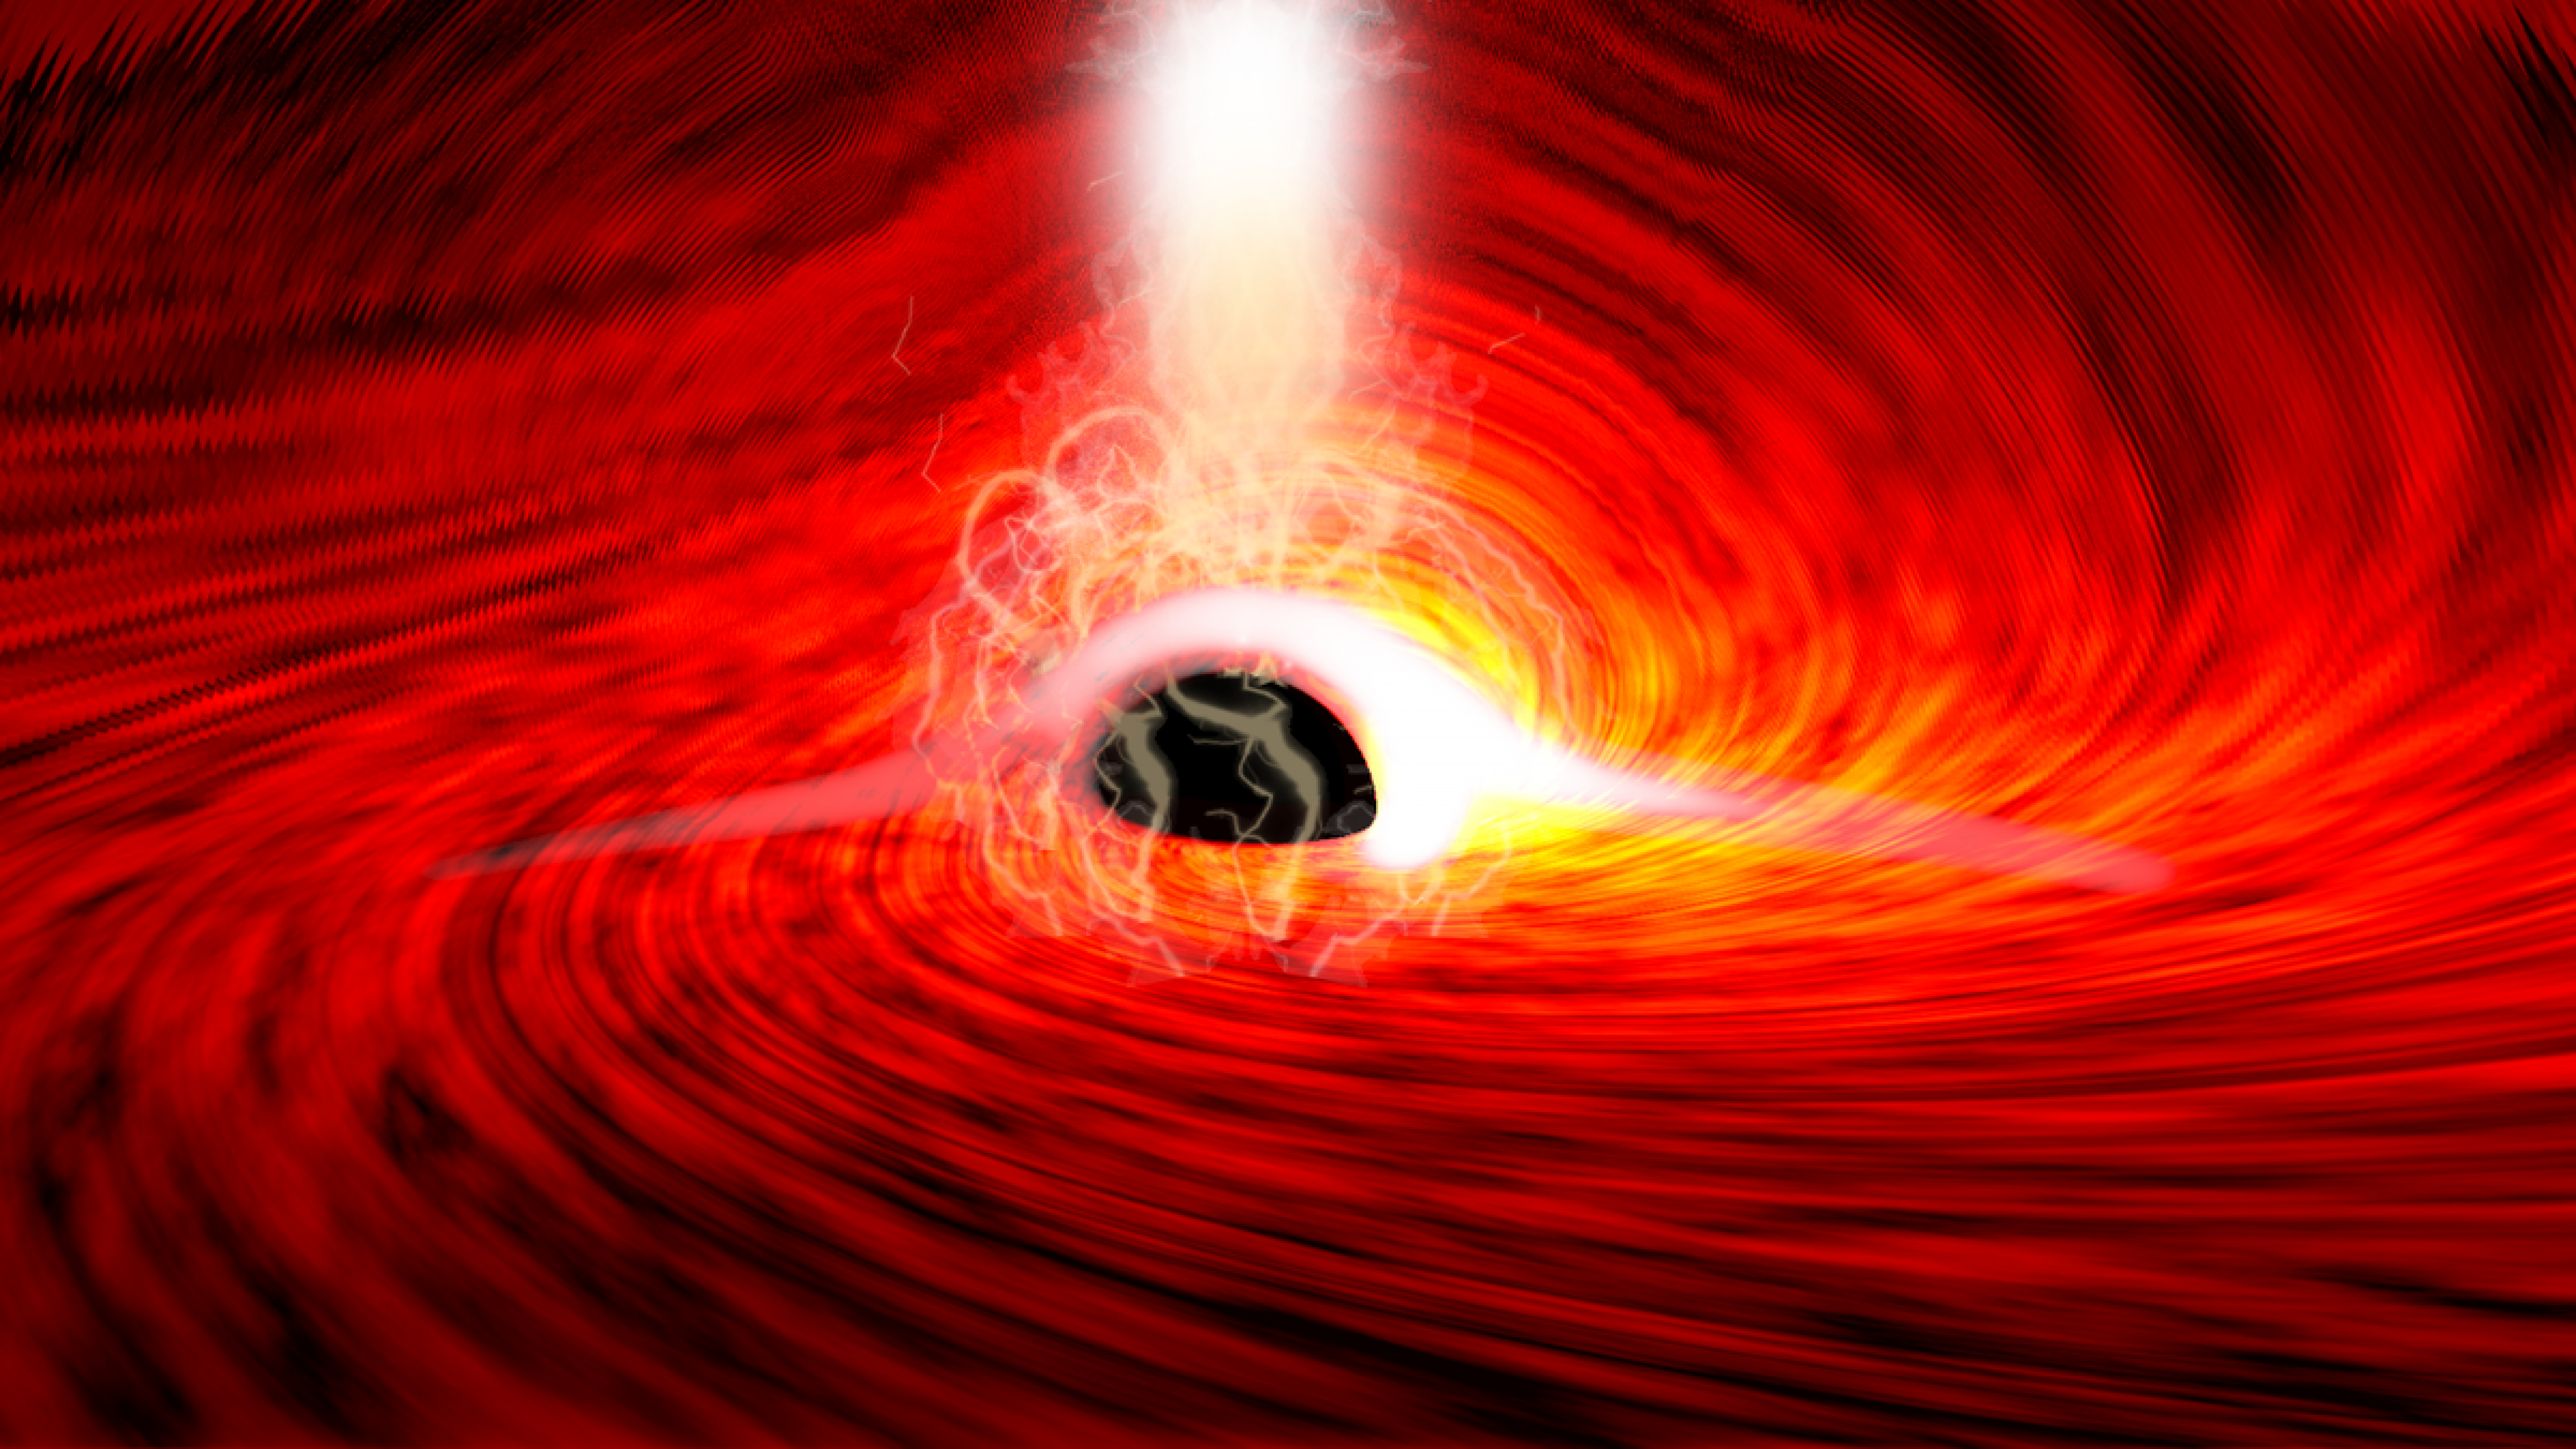 Physicists See Light Echoing From Behind a Black Hole for the First Time